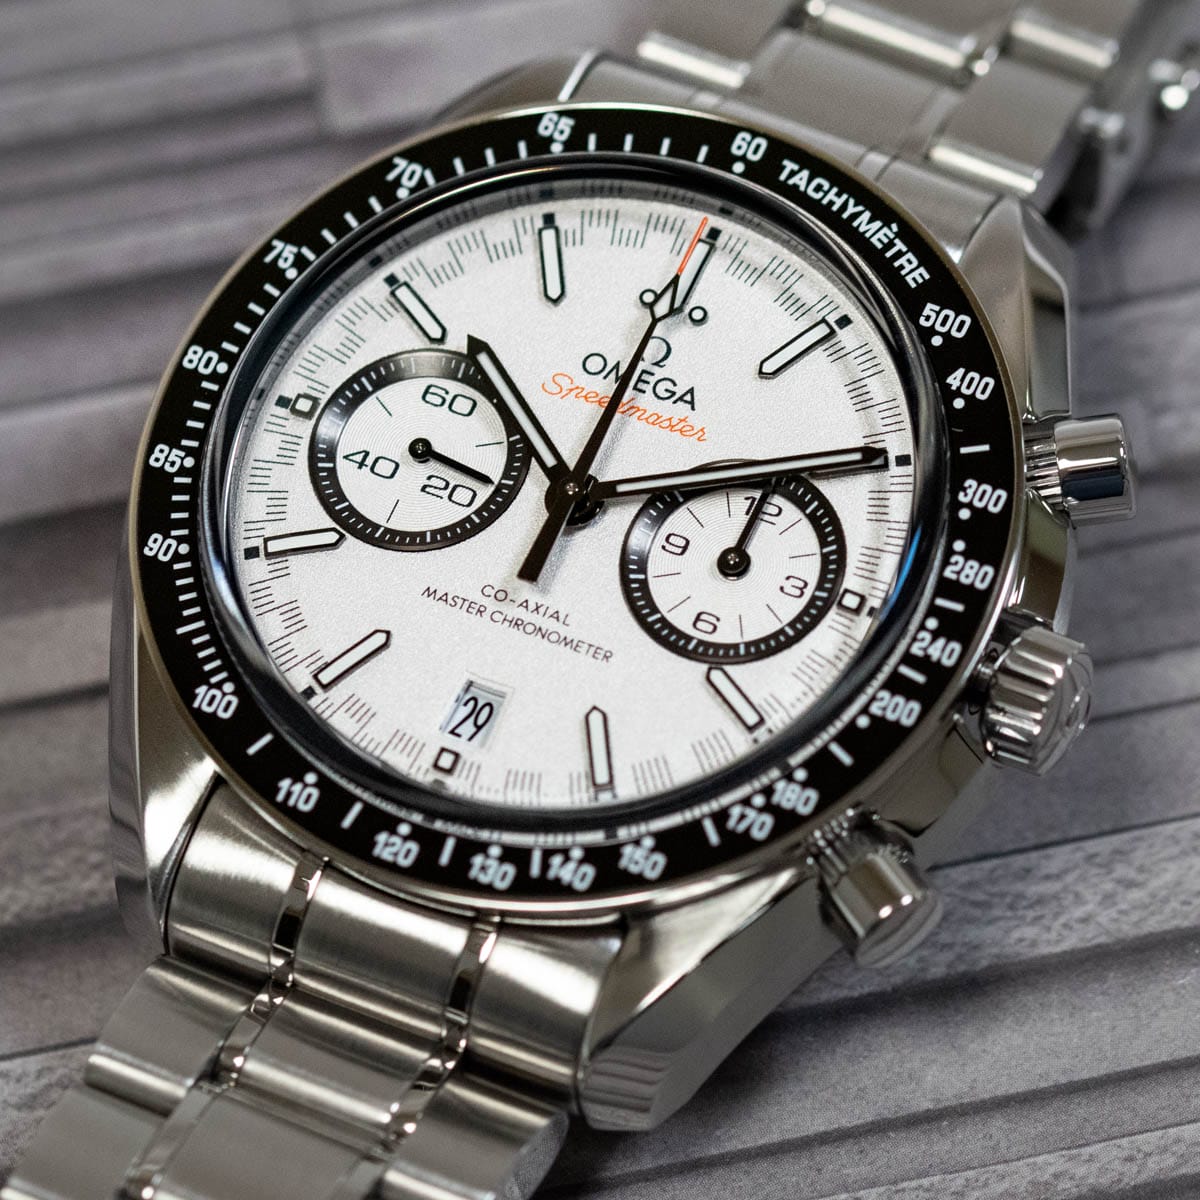 Stylied photo of  of Speedmaster Racing Chronograph